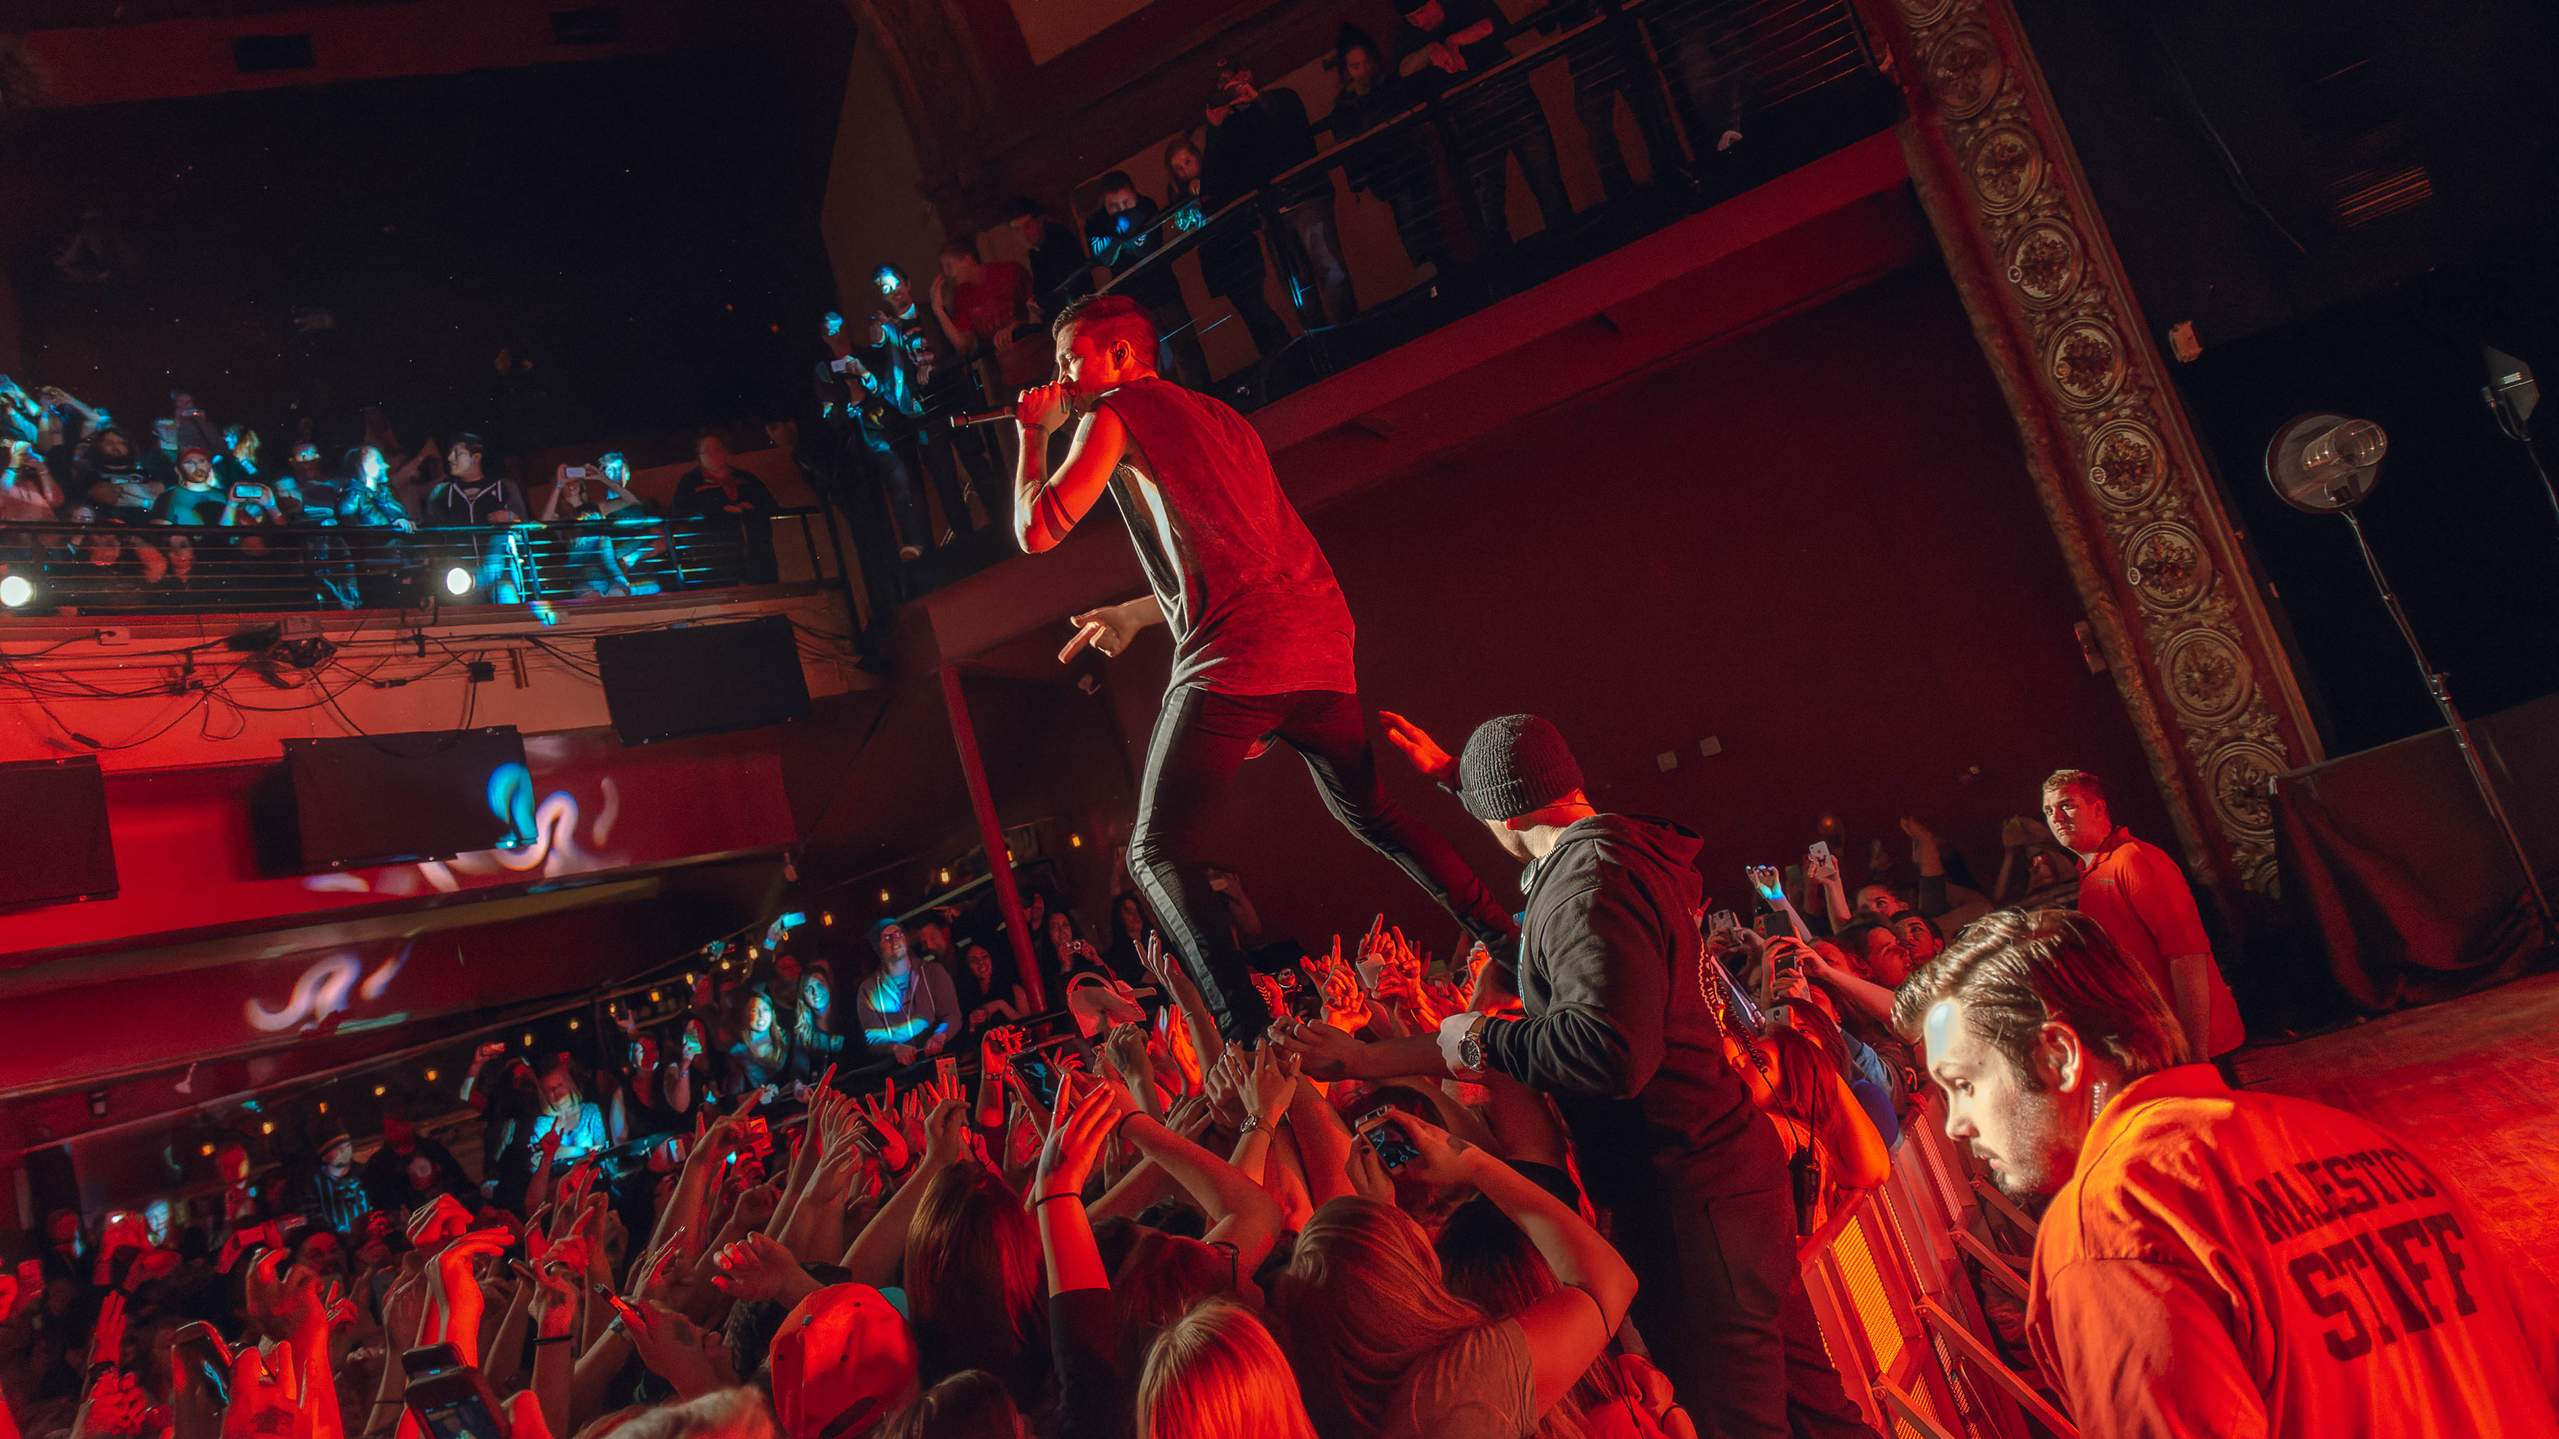 Above the Crowd - 21 Pilots' Unforgettable Show at The Majestic